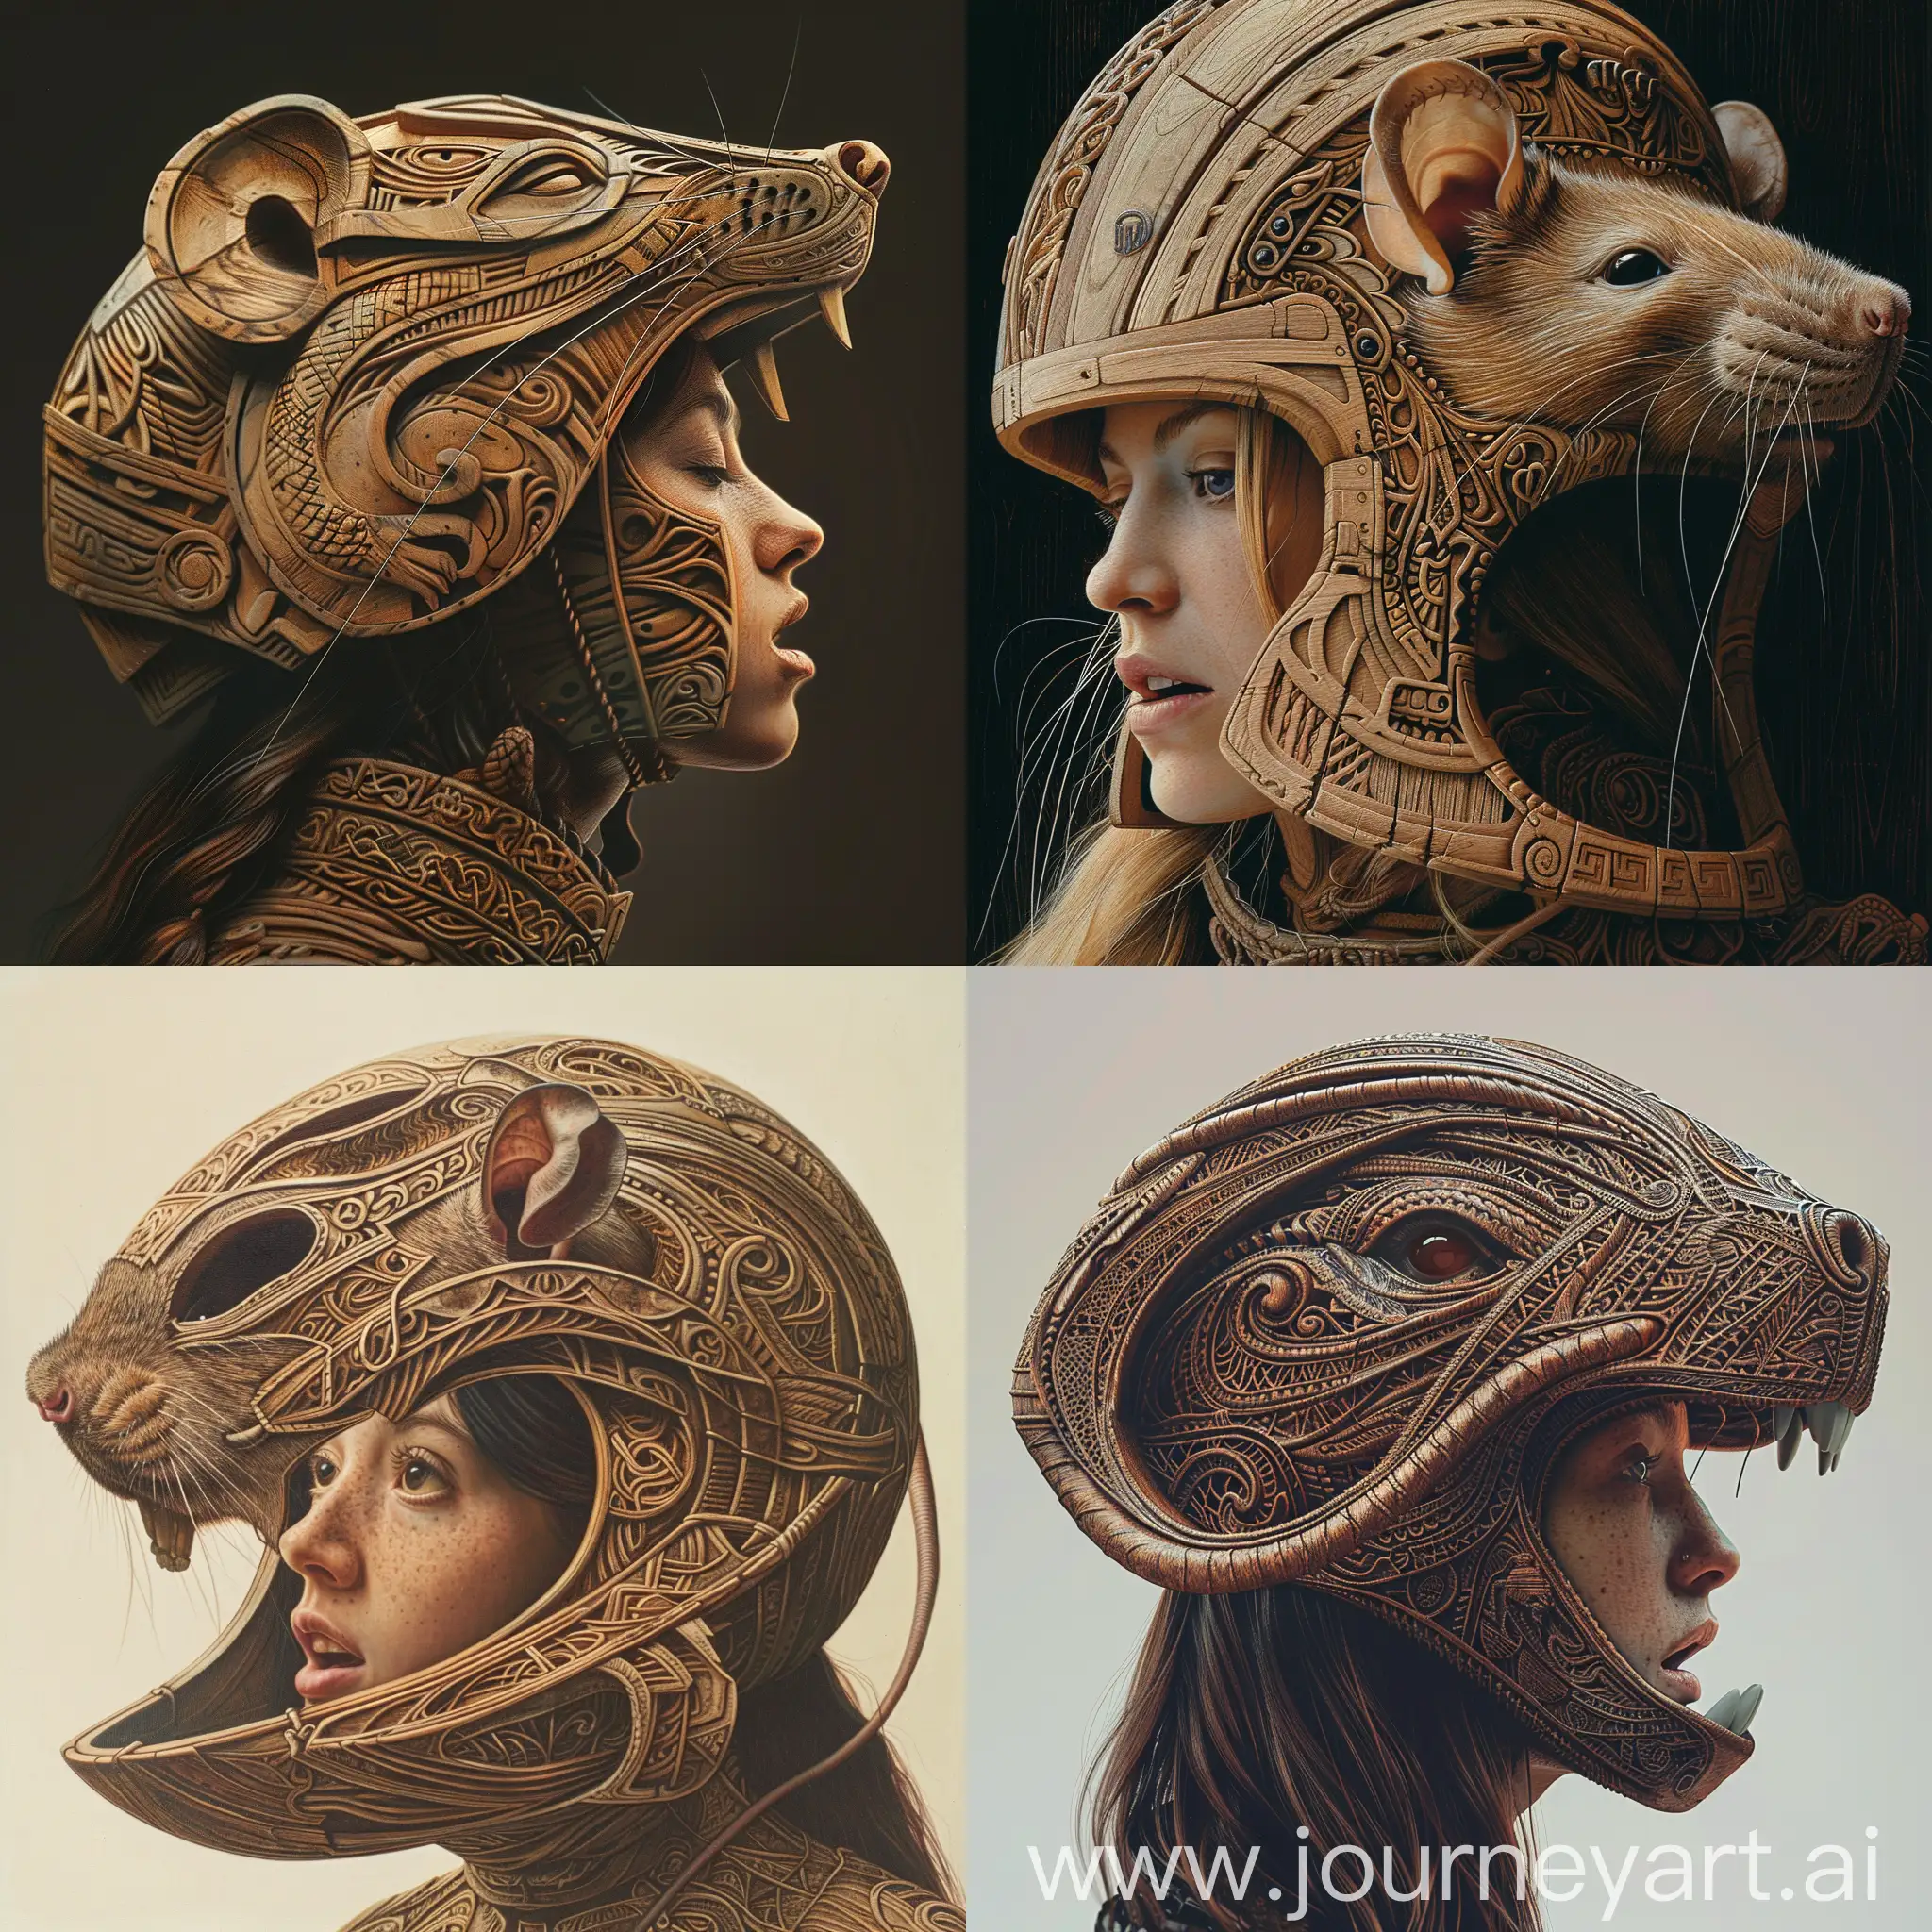 Create an image of a woman wearing a wooden helmet intricately carved to resemble a rat's face, with the rat's open mouth serving as the opening through which the woman's face is visible. The perspective should be a 3/4 angle